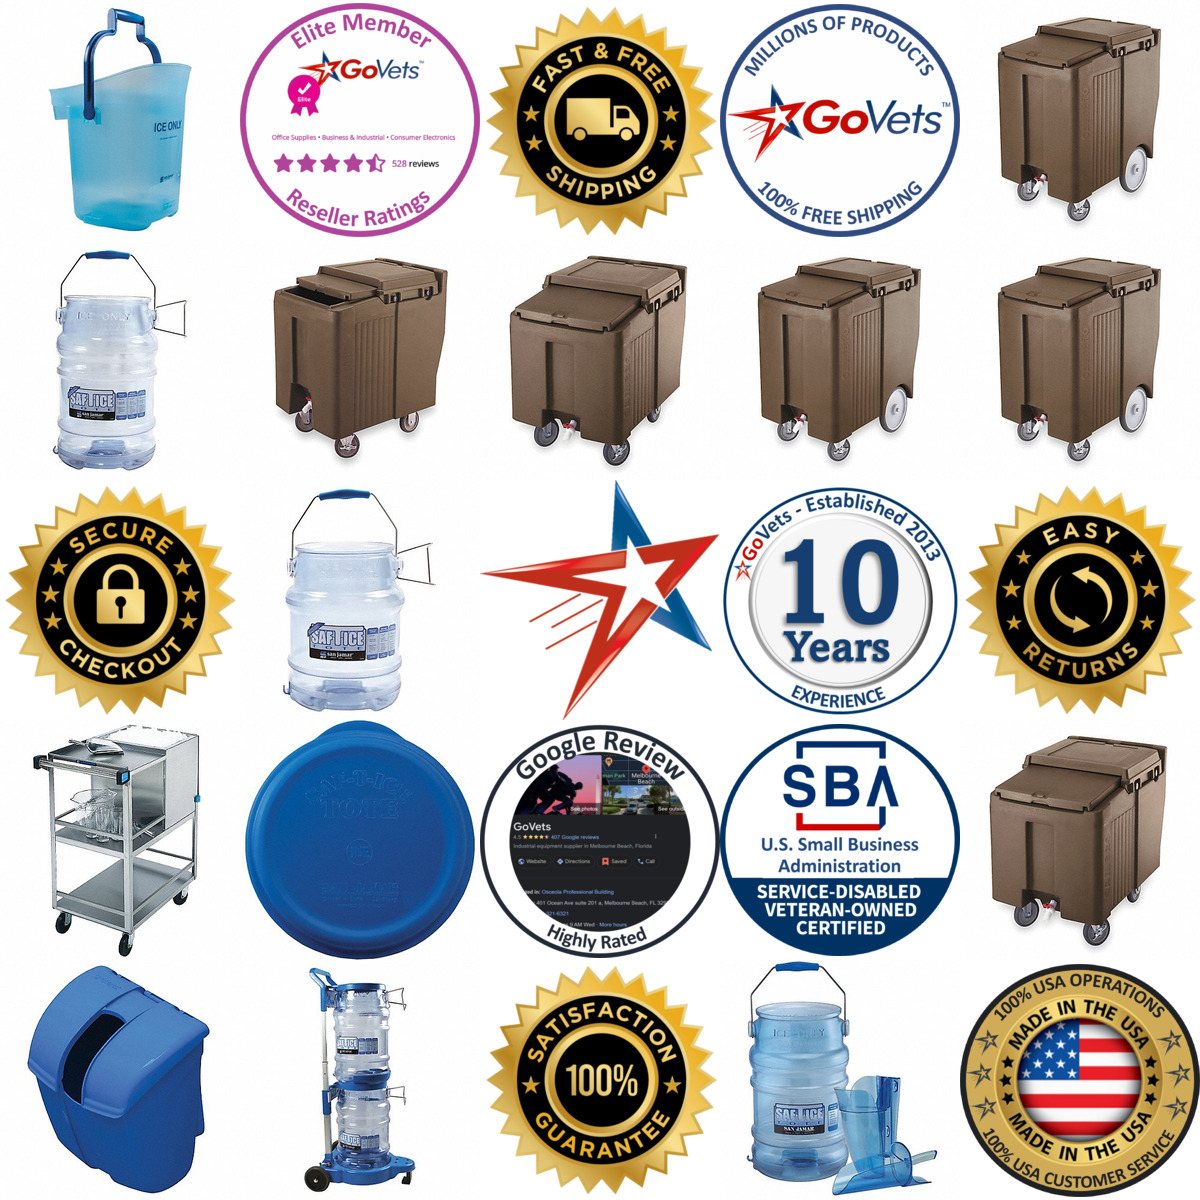 A selection of Ice Caddies Ice Totes and Accessories products on GoVets